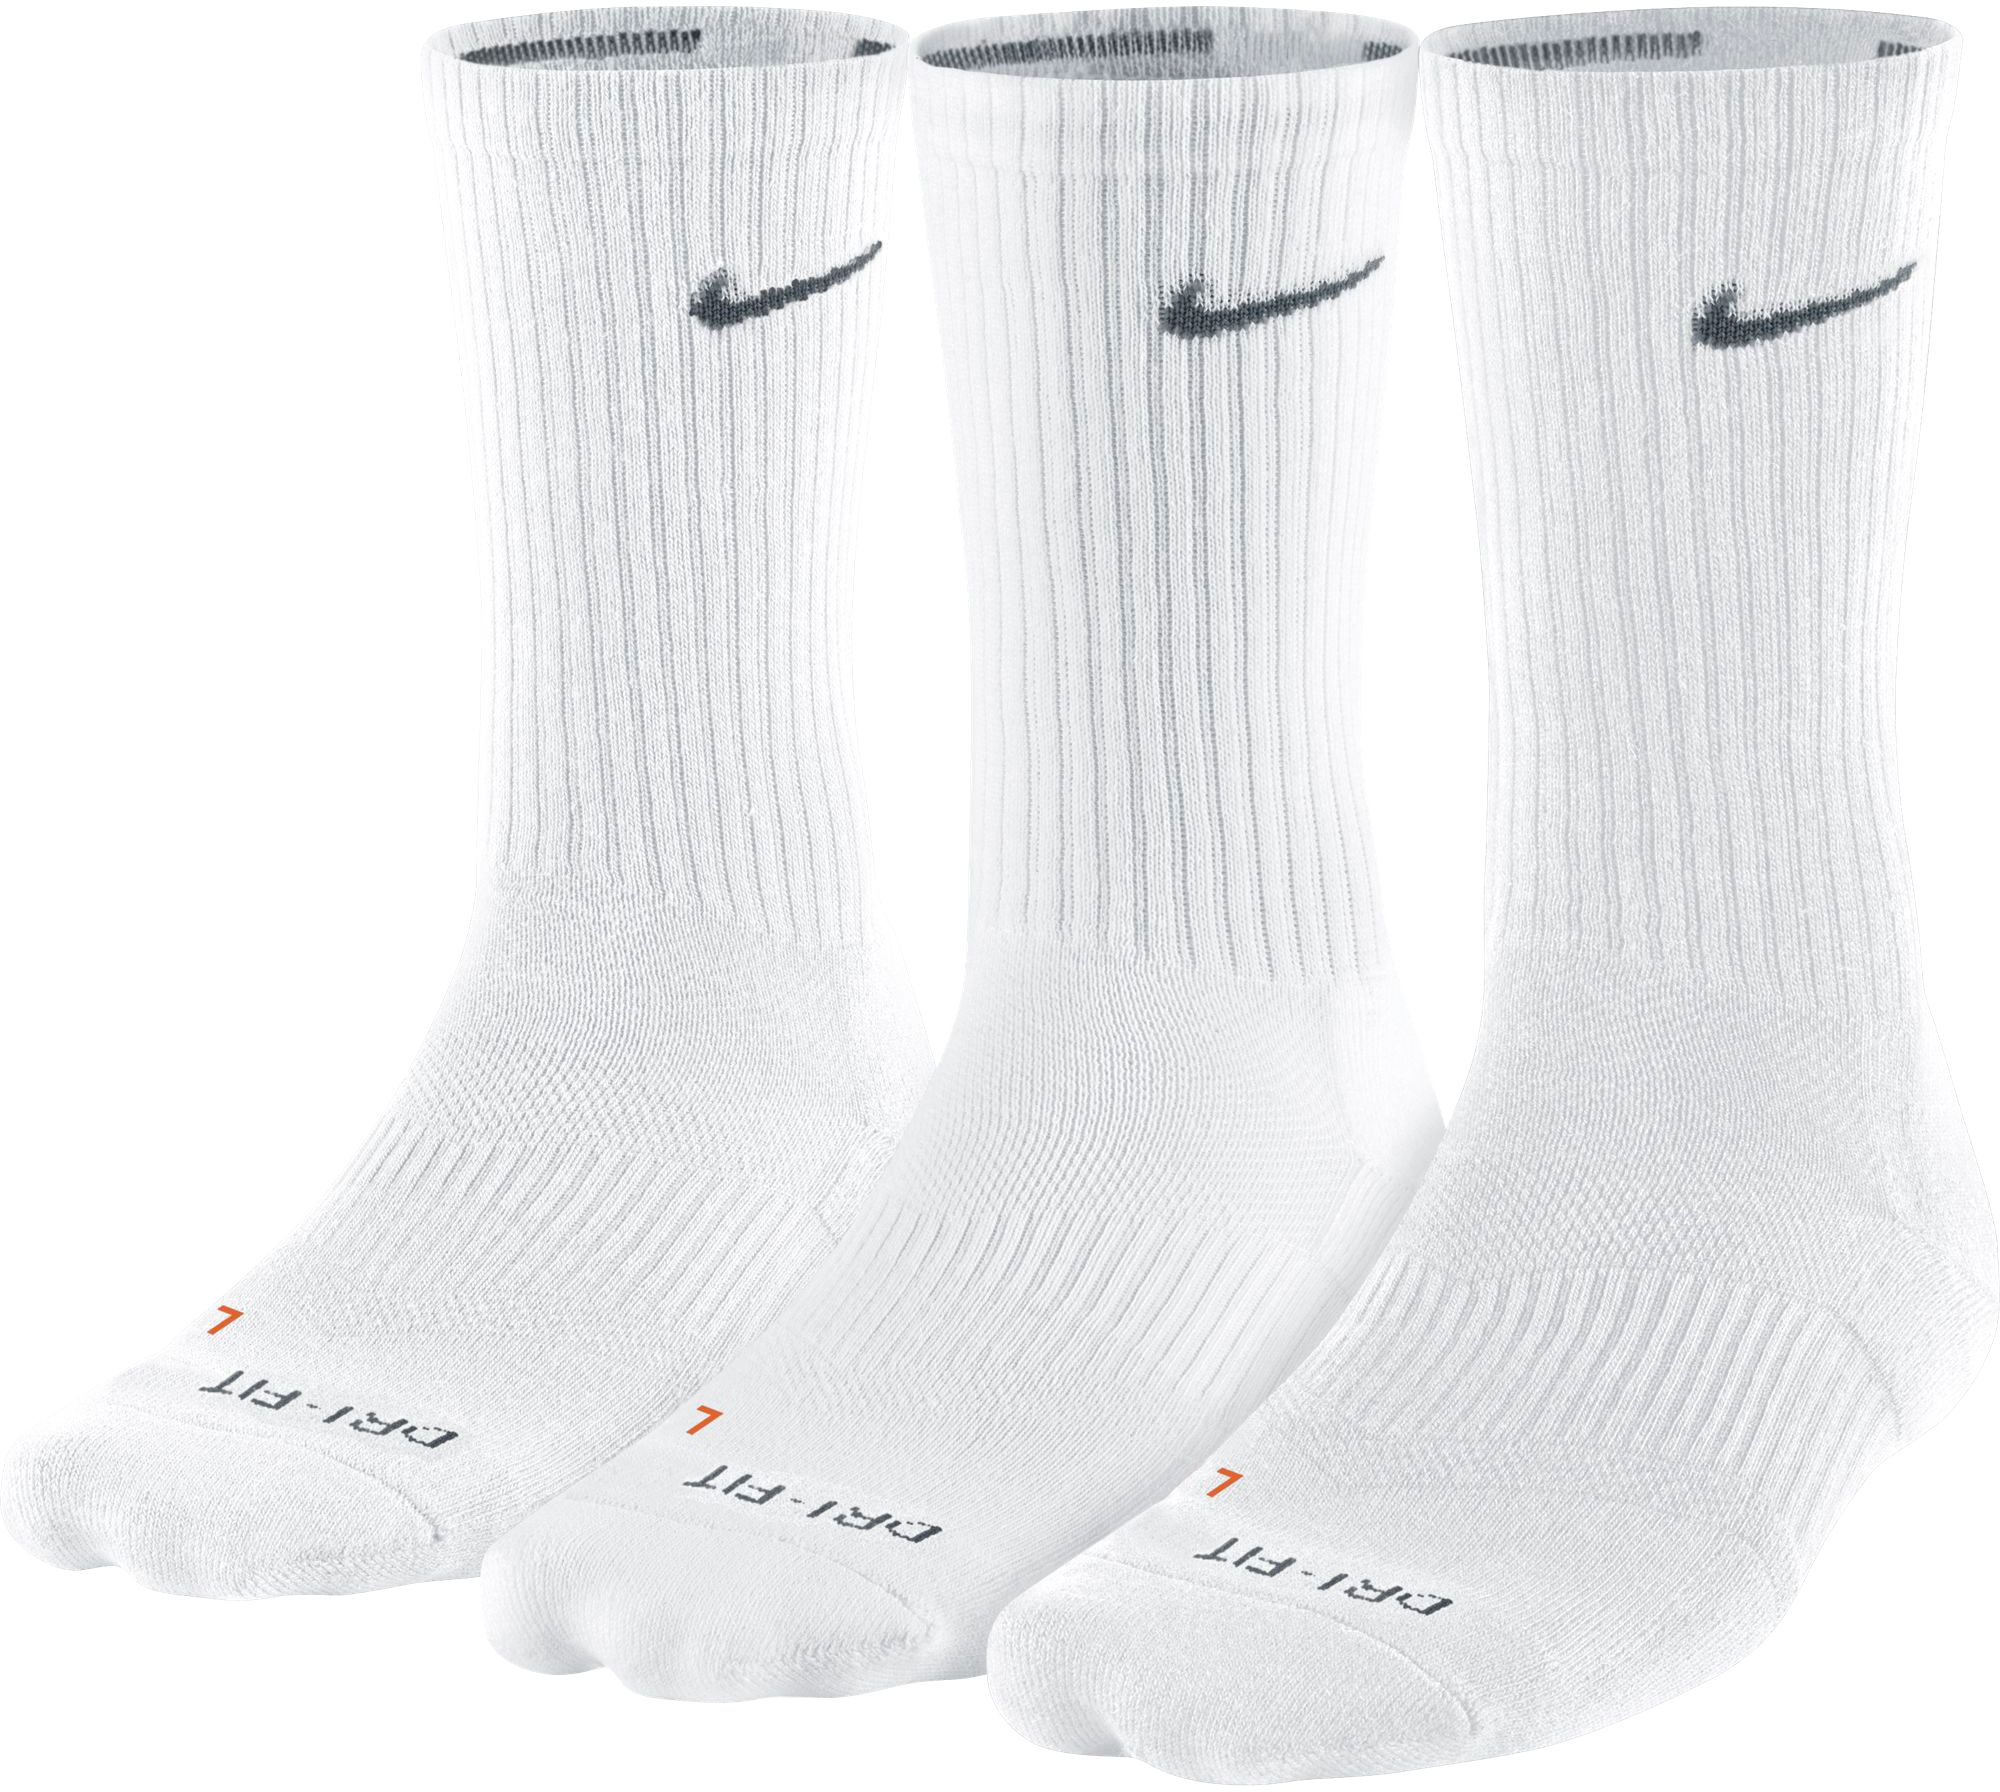 nike socks labeled left and right